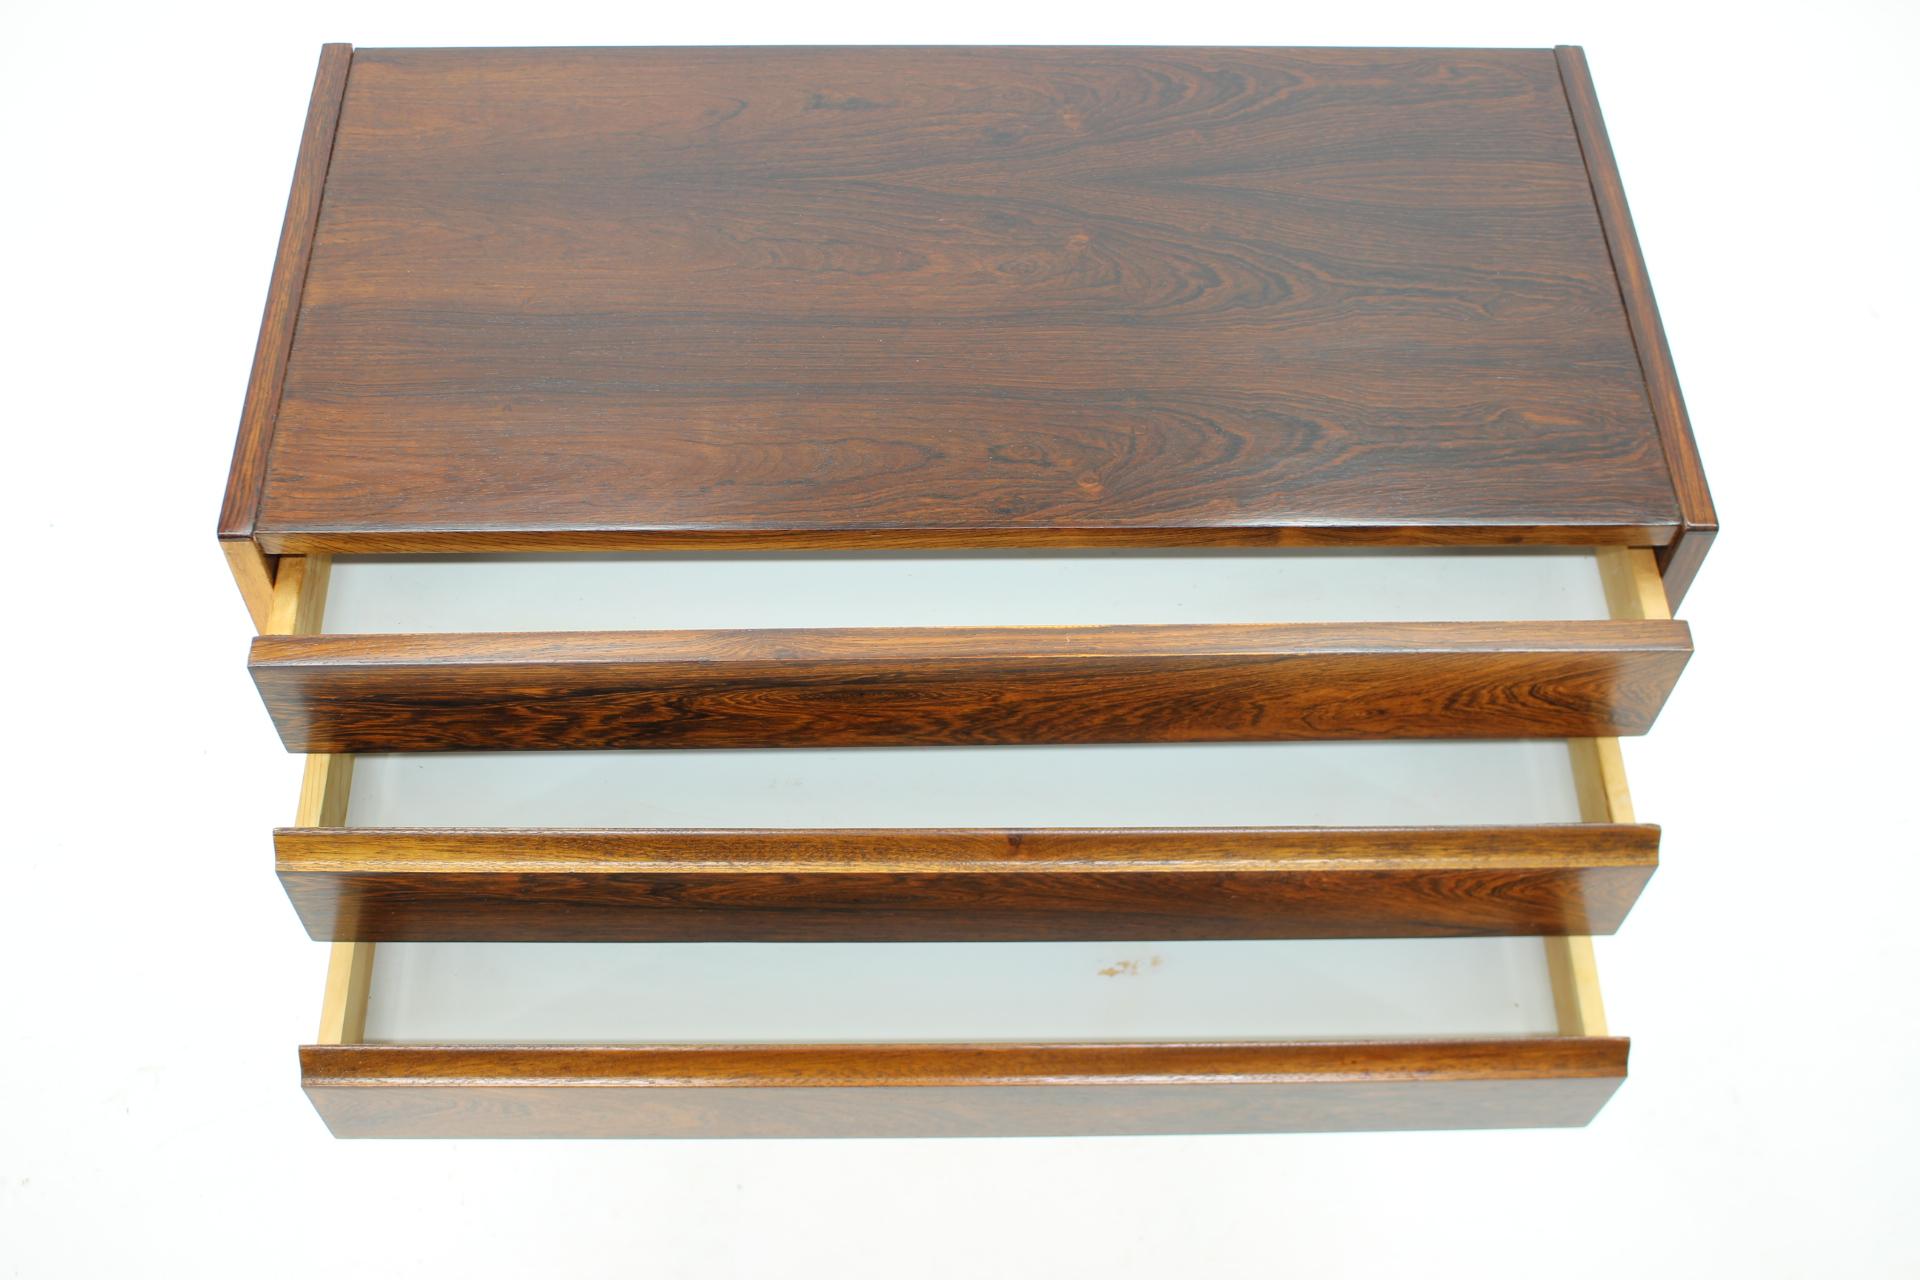 Wood 1960s Palisander Ches of Drawers, Denmark